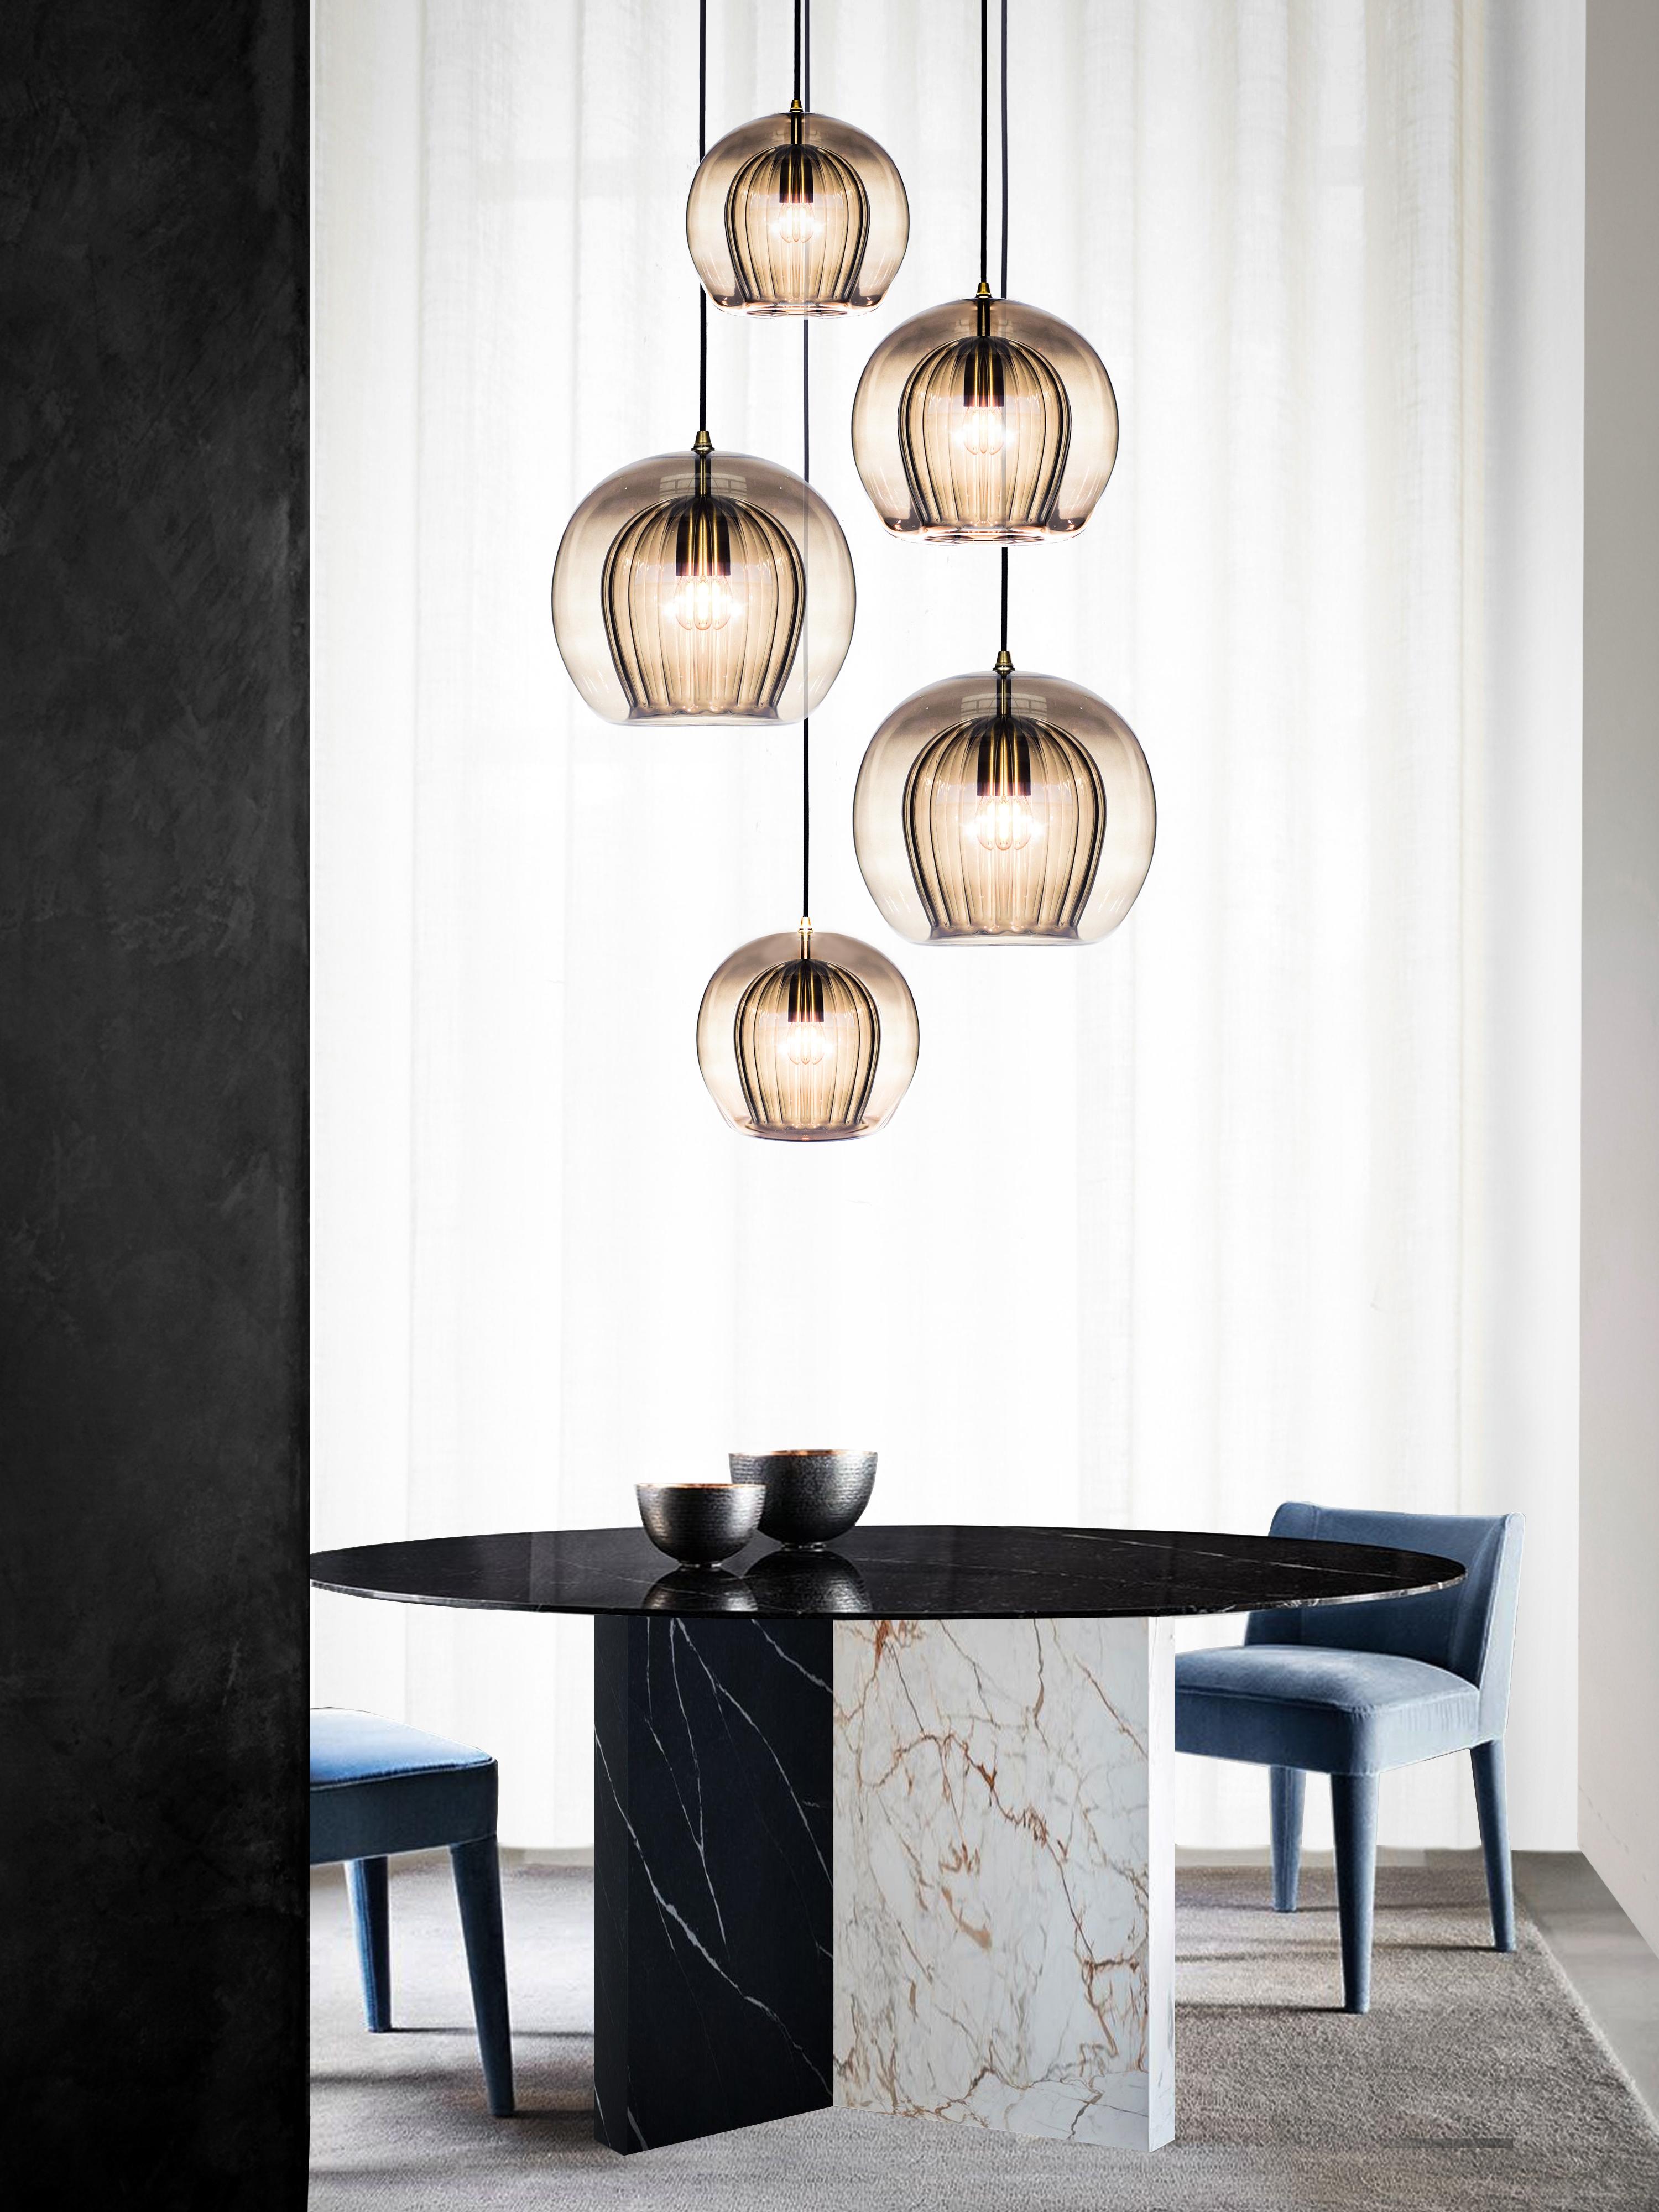 Our debut lighting collection comprising ceiling pendants, a side light and a floor standing lamp.

Handmade in Bohemia and London the collection draws upon our love for Czech artisan glass work and British engineered detailing.

Designed with